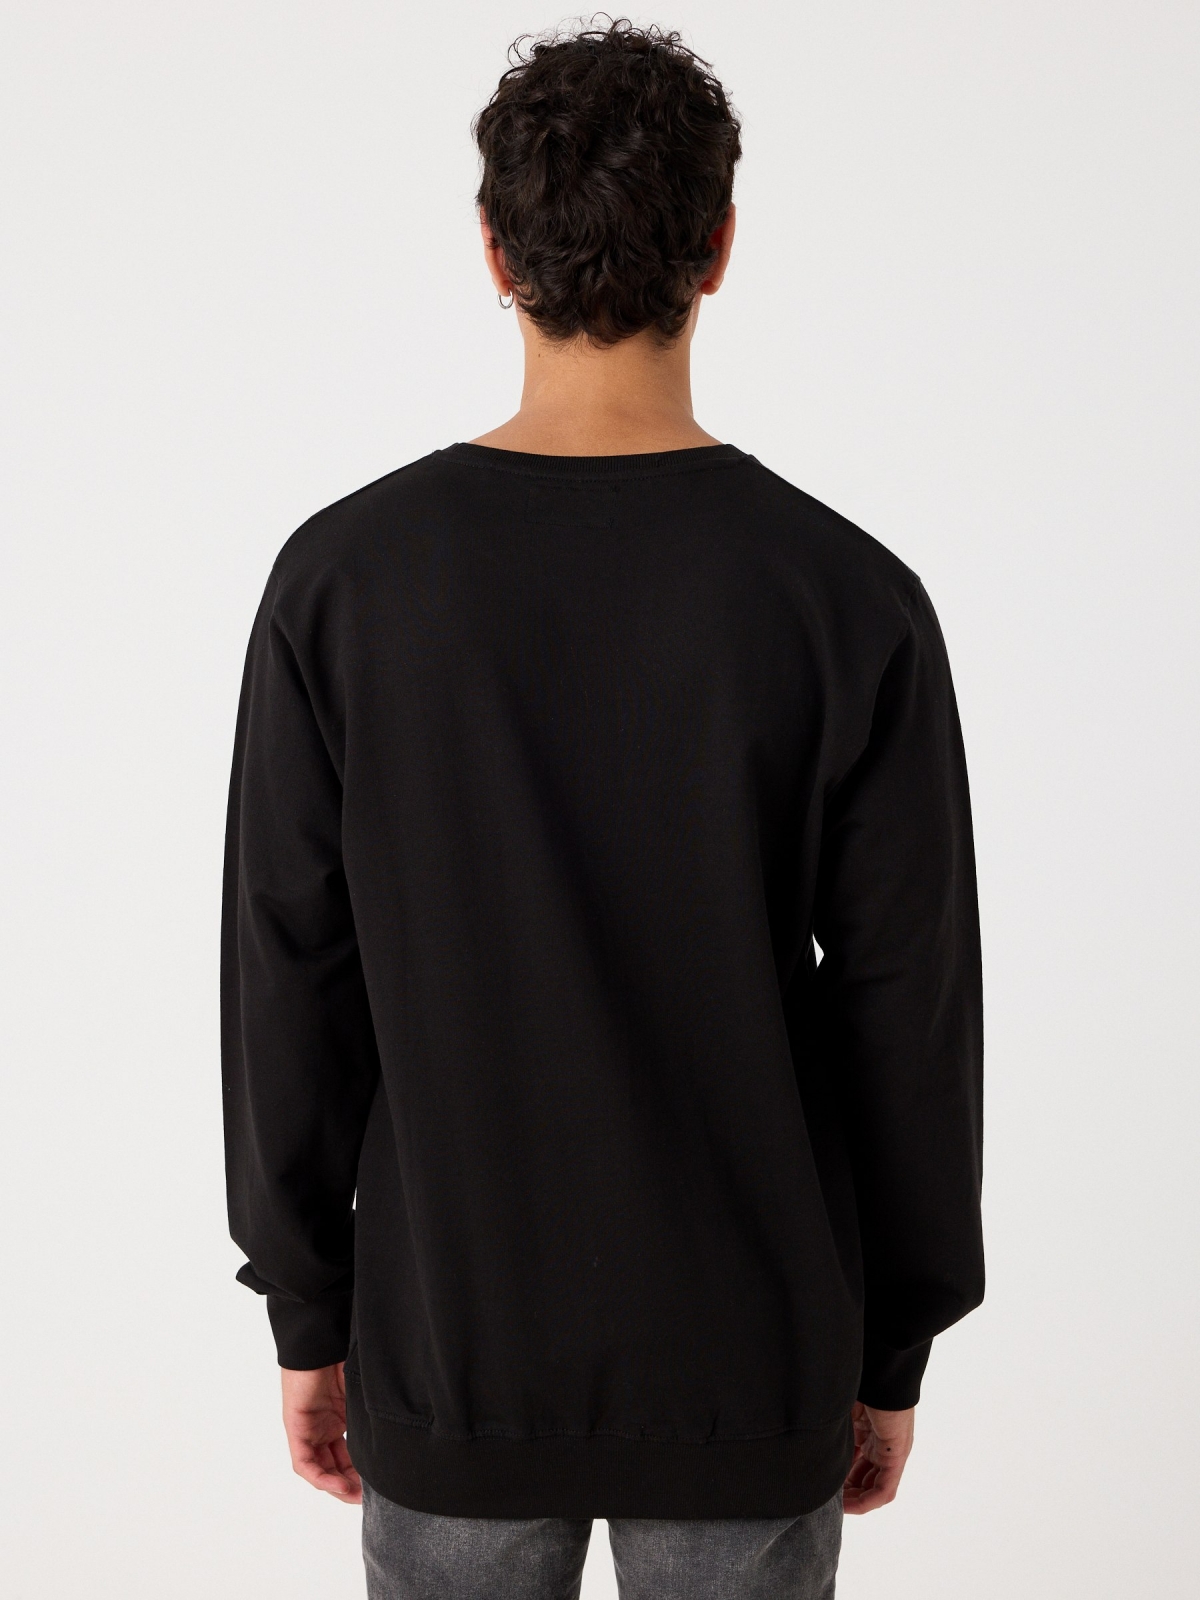 Hoodless sweatshirt with logo black middle back view